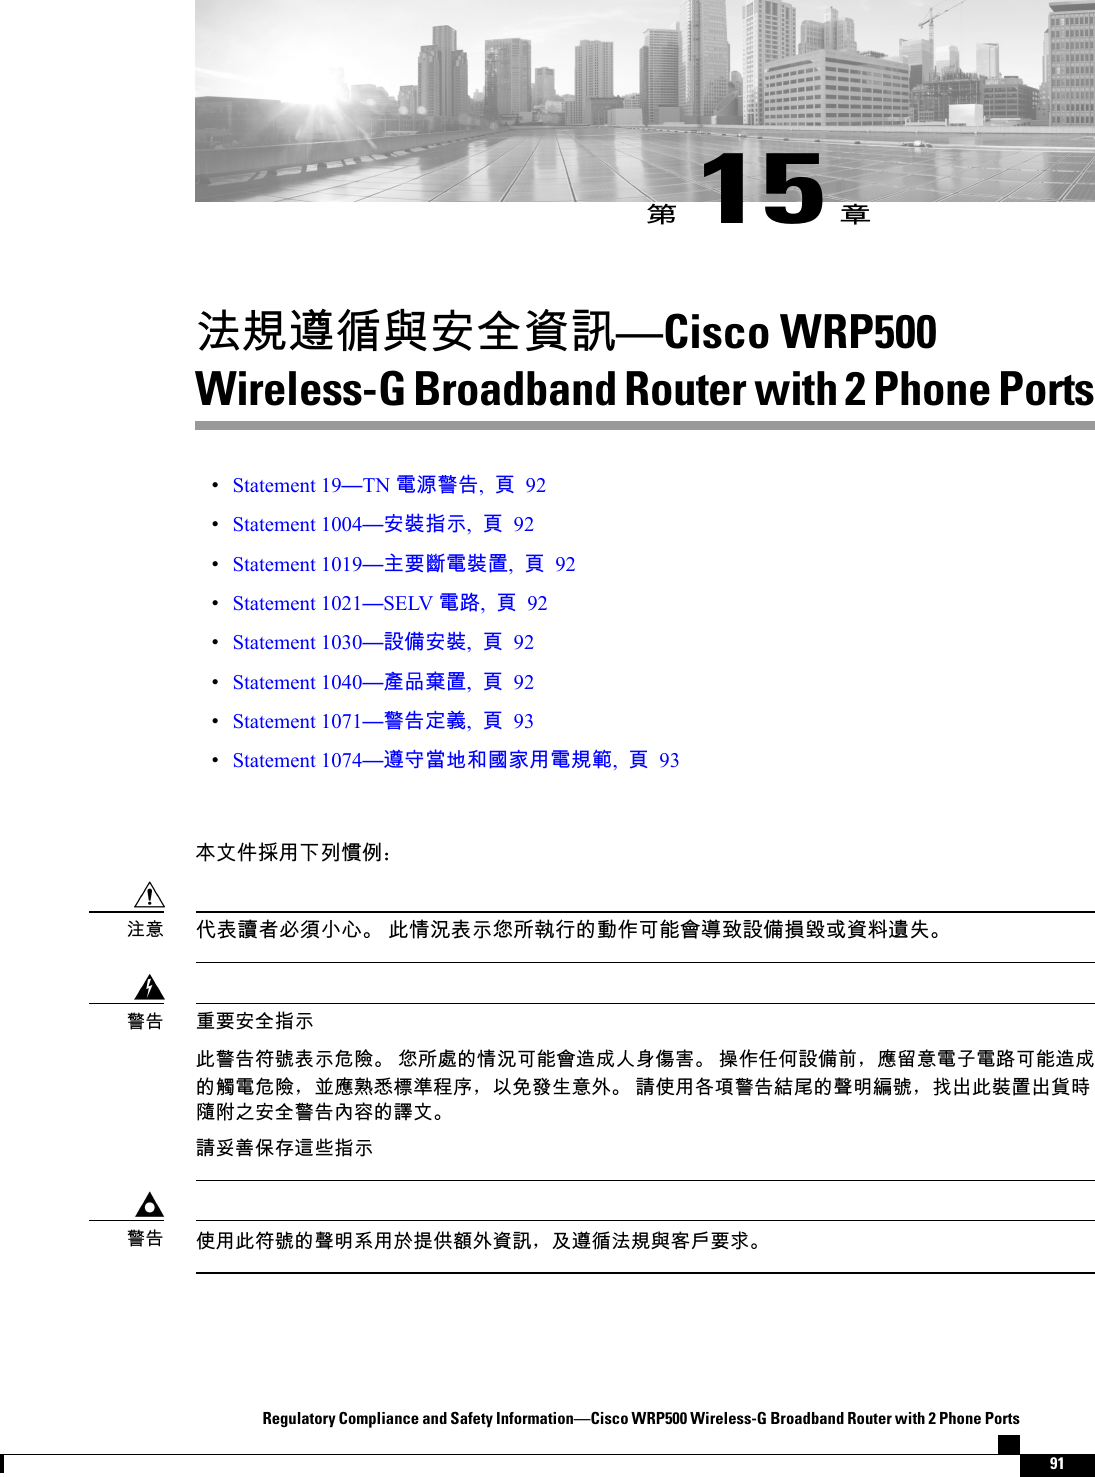 󳒼15󳑰󲙥󴌟󴨅󱤺󳮗󱔙󰫸󴙗󴎚Cisco WRP500Wireless-G Broadband Router with 2 Phone PortsStatement 19TN 󵂋󲠠󴓶󰷚,󵆑92Statement 1004󱔙󴉭󱲗󳋊,󵆑92Statement 1019󰟋󴌑󱽇󵂋󴉭󳣾,󵆑92Statement 1021SELV 󵂋󴝿,󵆑92Statement 1030󴎽󰨩󱔙󴉭,󵆑92Statement 1040󲺲󰹑󲉔󳣾,󵆑92Statement 1071󴓶󰷚󱔪󳤹,󵆑93Statement 1074󴨅󱔘󲼆󱃀󰸜󱂛󱕆󲺸󵂋󴌟󳕔,󵆑93󲂼󱼗󰢆󱴱󲺸󰞛󰮧󱫳󰤛：󰡳󴇸󴔐󳦕󱥕󵆘󱖟󱥓 󲓴󱩕󲙑󴇸󳋊󱨸󱯐󱆇󴇜󳀔󰱥󰣬󰵿󳪍󲂓󱖞󳮄󴎽󰨩󱶝󲕐󱮦󴙗󱼩󴨊󱋁󲙸󱪟󴭝󴌑󱔙󰫸󱲗󳋊󲓴󴓶󰷚󳒶󳿯󴇸󳋊󰴁󵀺 󱨸󱯐󳿥󳀔󱩕󲙑󰵿󳪍󲂓󴦰󱮠󰡊󴠻󰩇󱕃 󱹝󰣬󰢋󰣥󴎽󰨩󰯝，󱭙󲻩󱪟󵂋󱓠󵂋󴝿󰵿󳪍󴦰󱮠󳀔󴎈󵂋󰴁󵀺，󰞶󱭙󲬯󱨙󲎩󲠦󳎛󱠟，󰡵󰫝󳀌󲺯󱪟󱊦 󴑛󰤏󲺸󰶔󵆕󴓶󰷚󳛠󱗎󳀔󳨂󱾞󳝸󳿯，󱰎󰮊󲓴󴉭󳣾󰮊󴘸󱿒󵀸󴿔󰟛󱔙󰫸󴓶󰷚󰫷󱕉󳀔󴓿󱼗󴑛󱌵󰼔󰥭󱓨󴦩󰠫󱲗󳋊󴓶󰷚󰤏󲺸󲓴󳒶󳿯󳀔󳨂󱾞󳚋󲺸󱽌󱵠󰤫󵇝󱊦󴙗󴎚，󰵚󴨅󱤺󲙥󴌟󳮗󱔲󱯆󴌑󲗒󴓶󰷚Regulatory Compliance and Safety InformationCisco WRP500 Wireless-G Broadband Router with 2 Phone Ports91